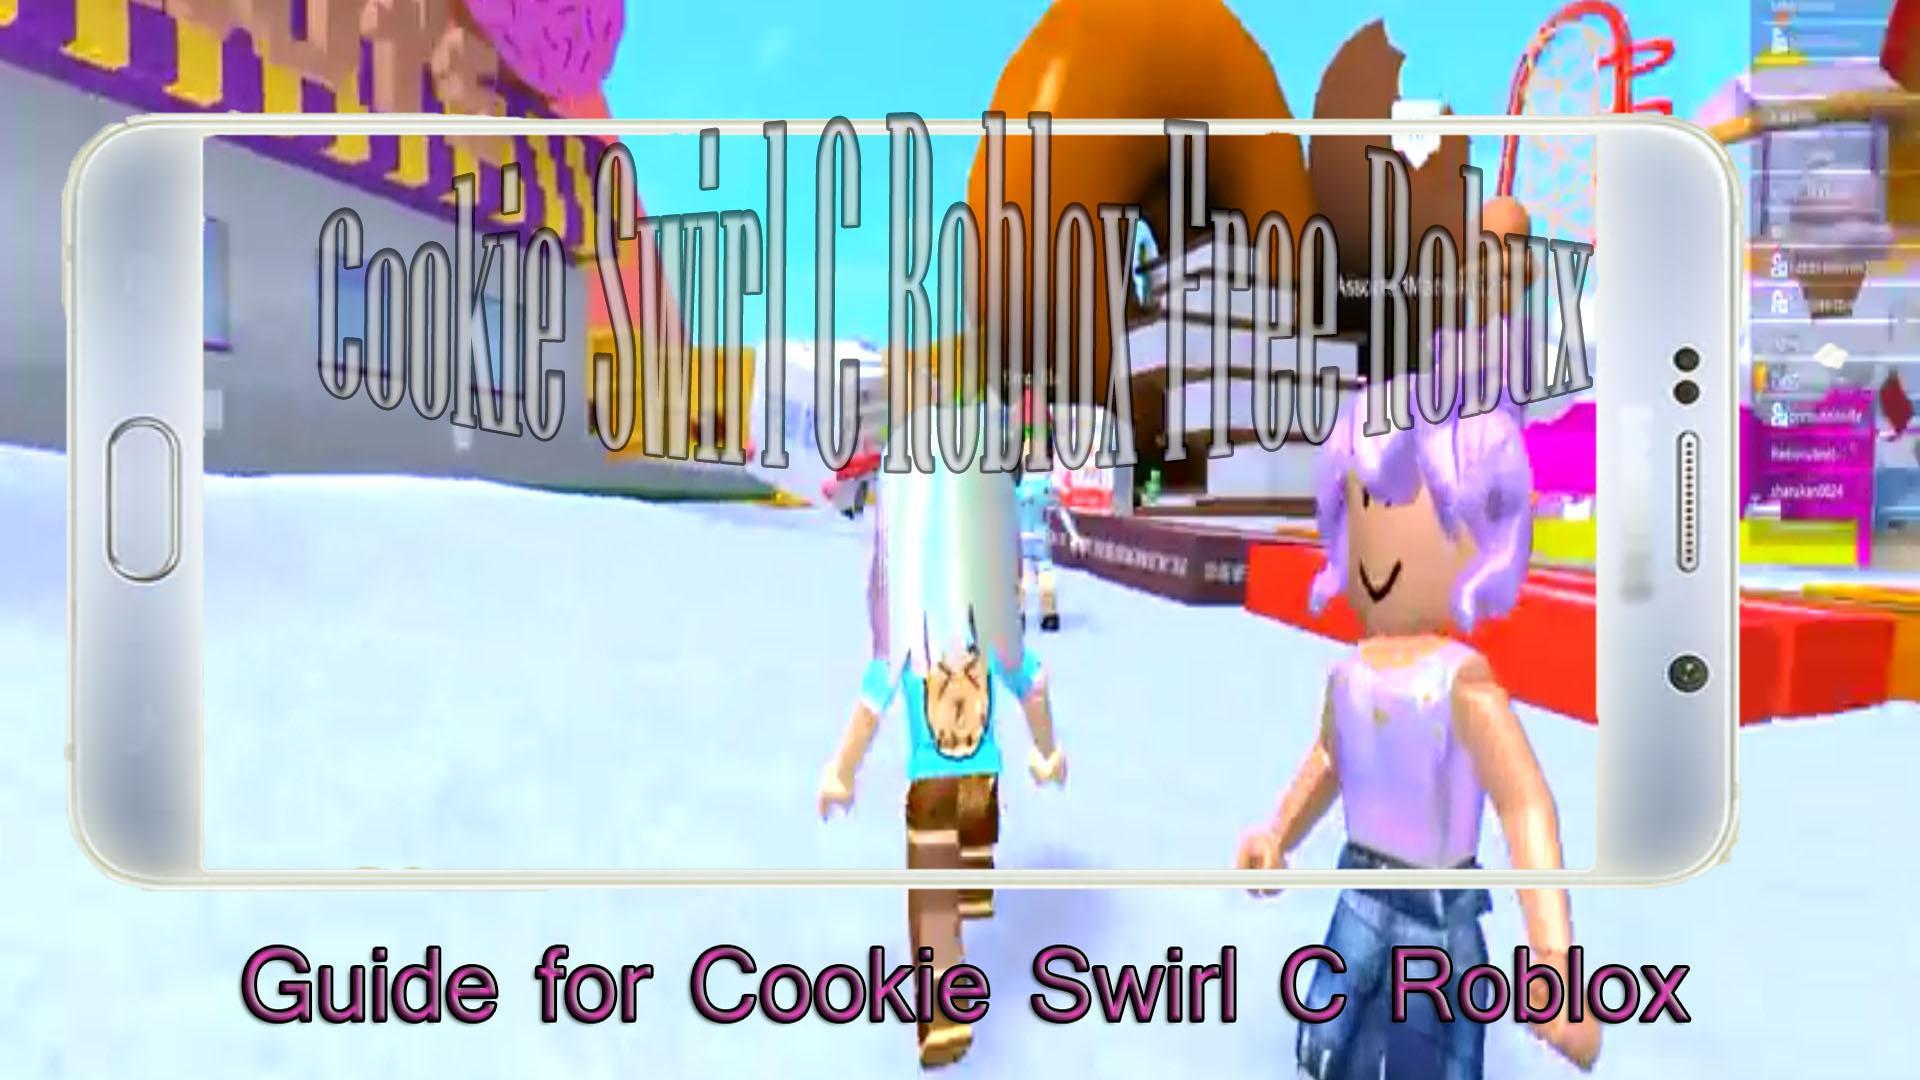 Robux Free Tips Cookie Swirl C Roblox For Android Apk Download - tips of cookie swirl c roblox new free android app market